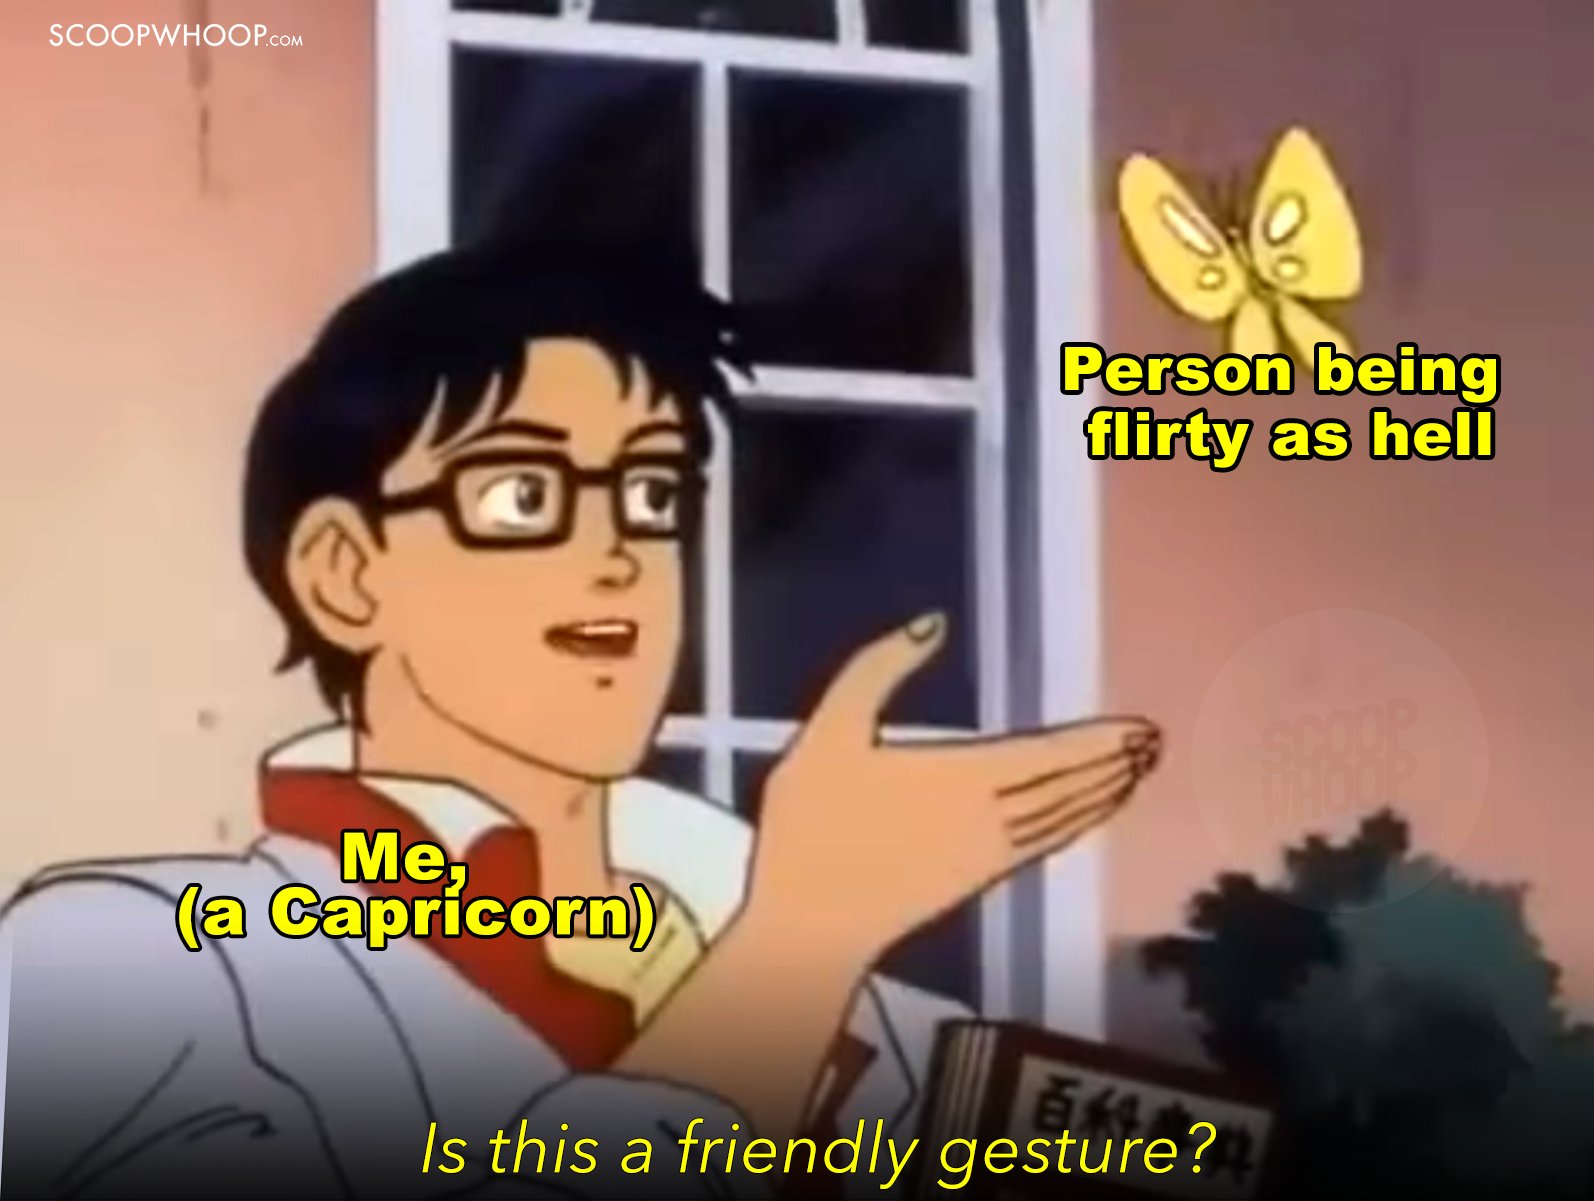 18 Capricorn Memes You Know You’ll Love, Cause You Know Everything Anyway